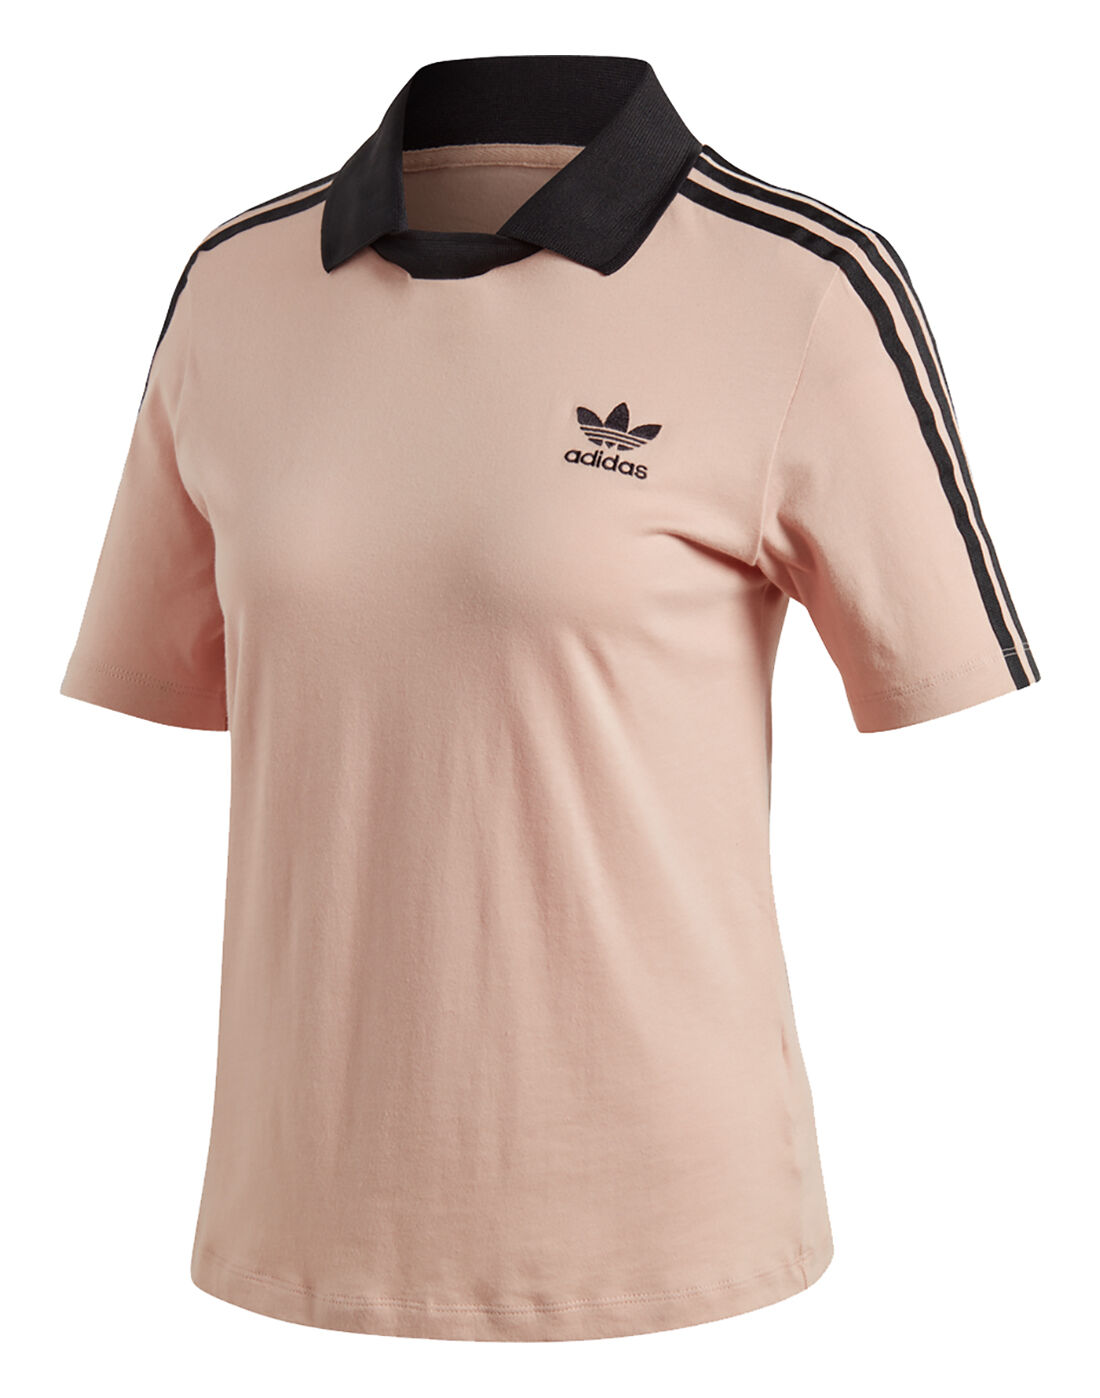 adidas sports t shirts with collar